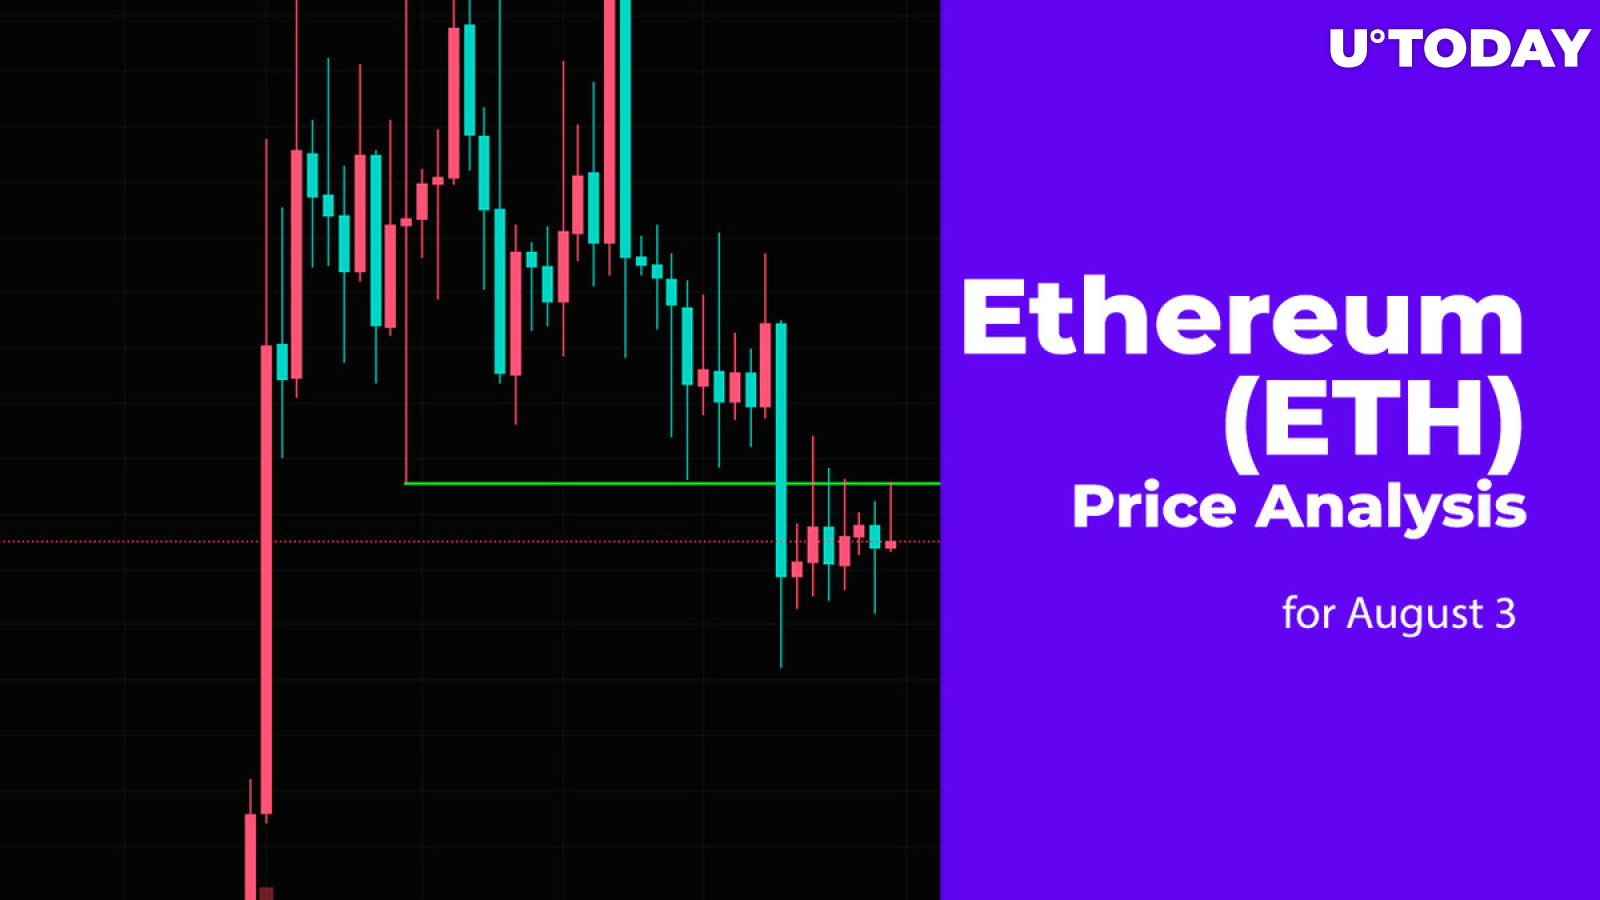 Ethereum (ETH) Price Analysis for August 3